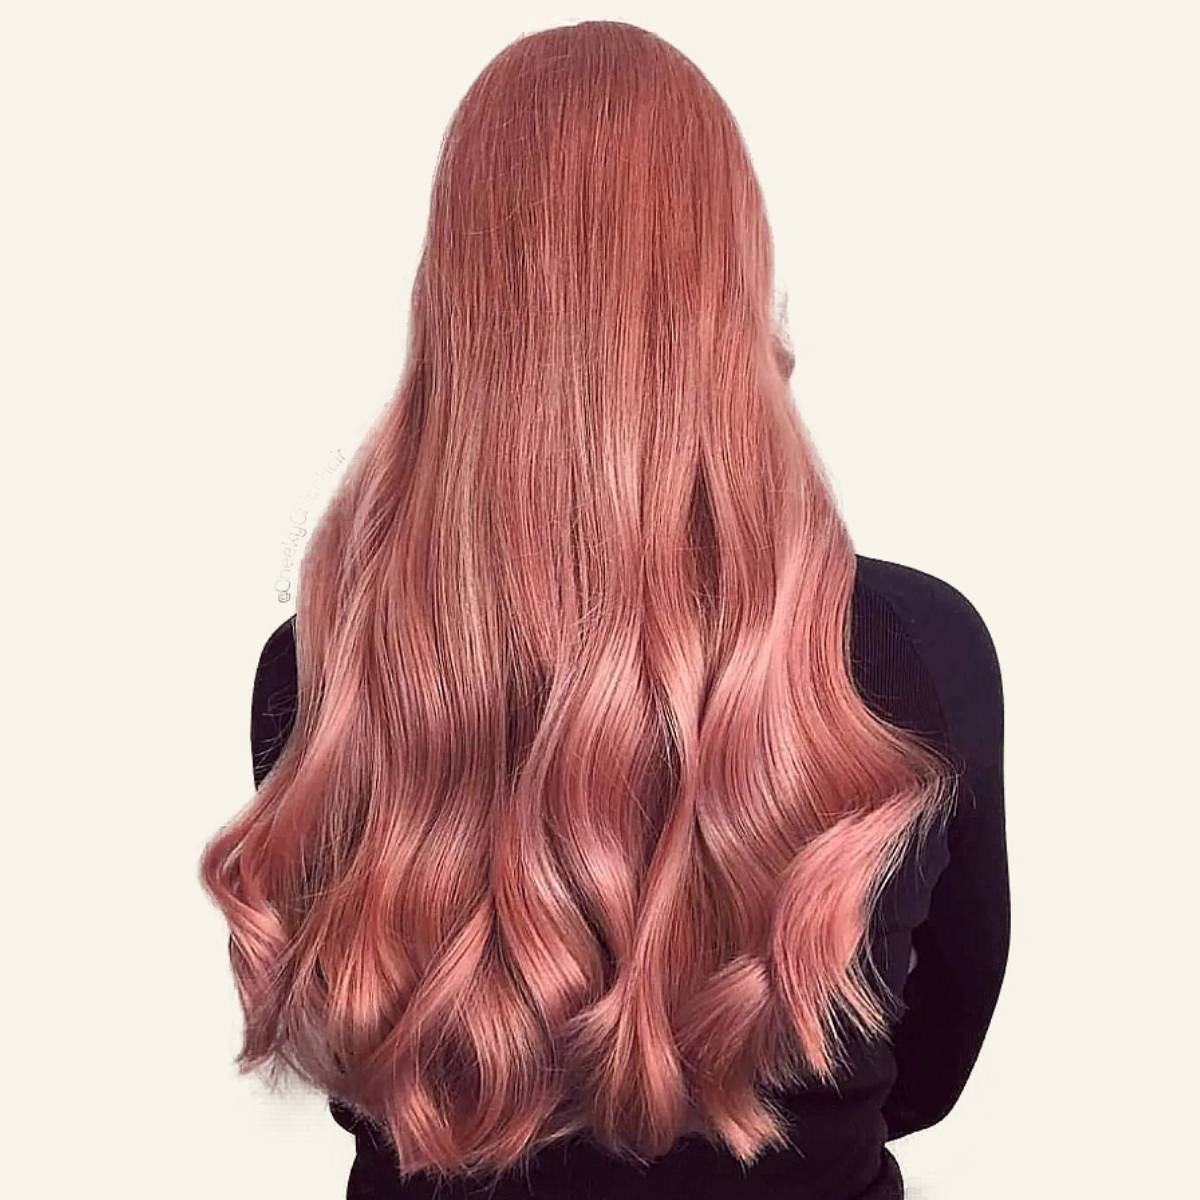 Buy Color Mask Rose Gold Toning Shampoo  Toning Shampoo for Blonde and  Light Brown Hair  Rose Gold Color Depositing Shampoo Four Reasons 676 fl  oz Online at Low Prices in